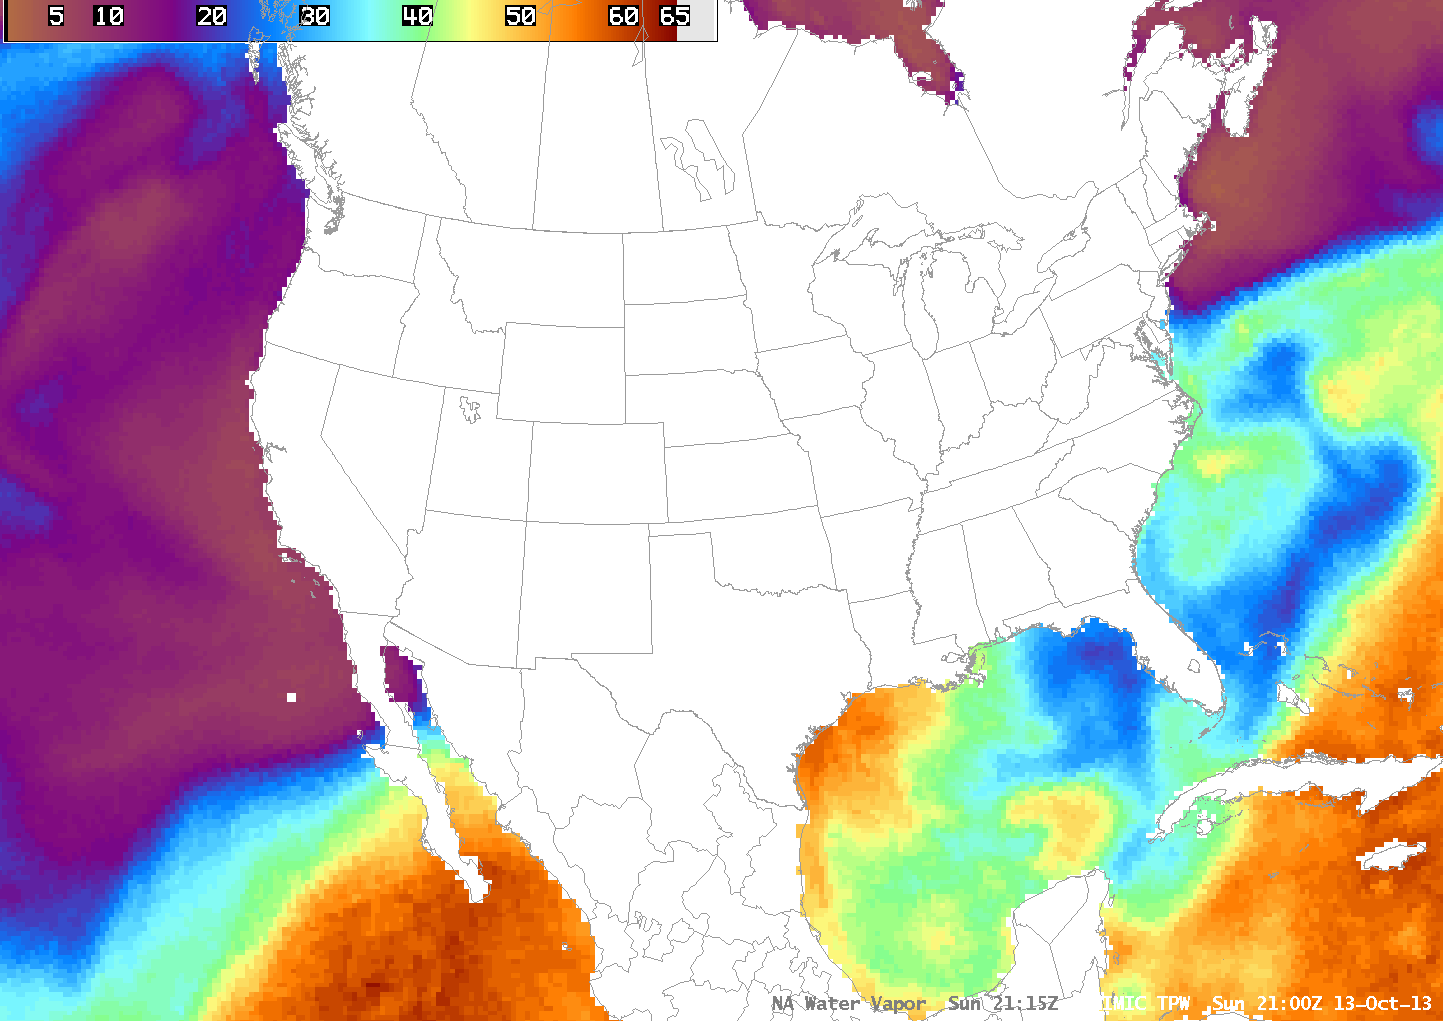 MIMIC Total Precipitable Water (click to play animation)